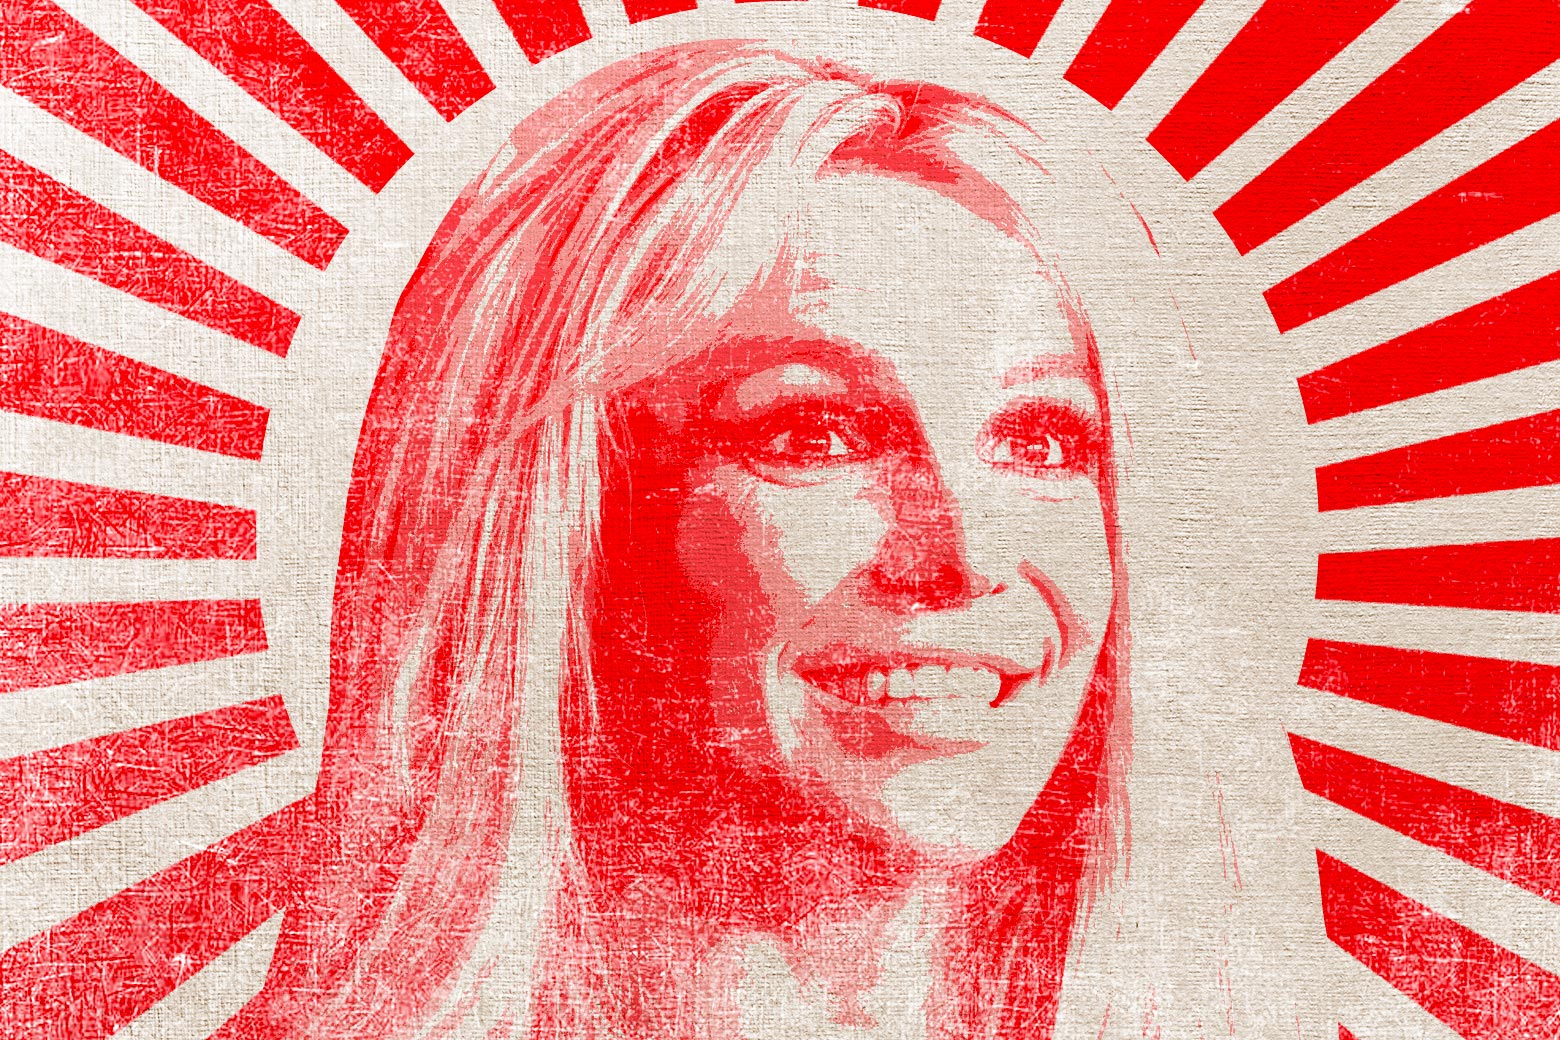 Britney Spears, red beams radiating out from our communist queen, in the style of a communist propaganda poster